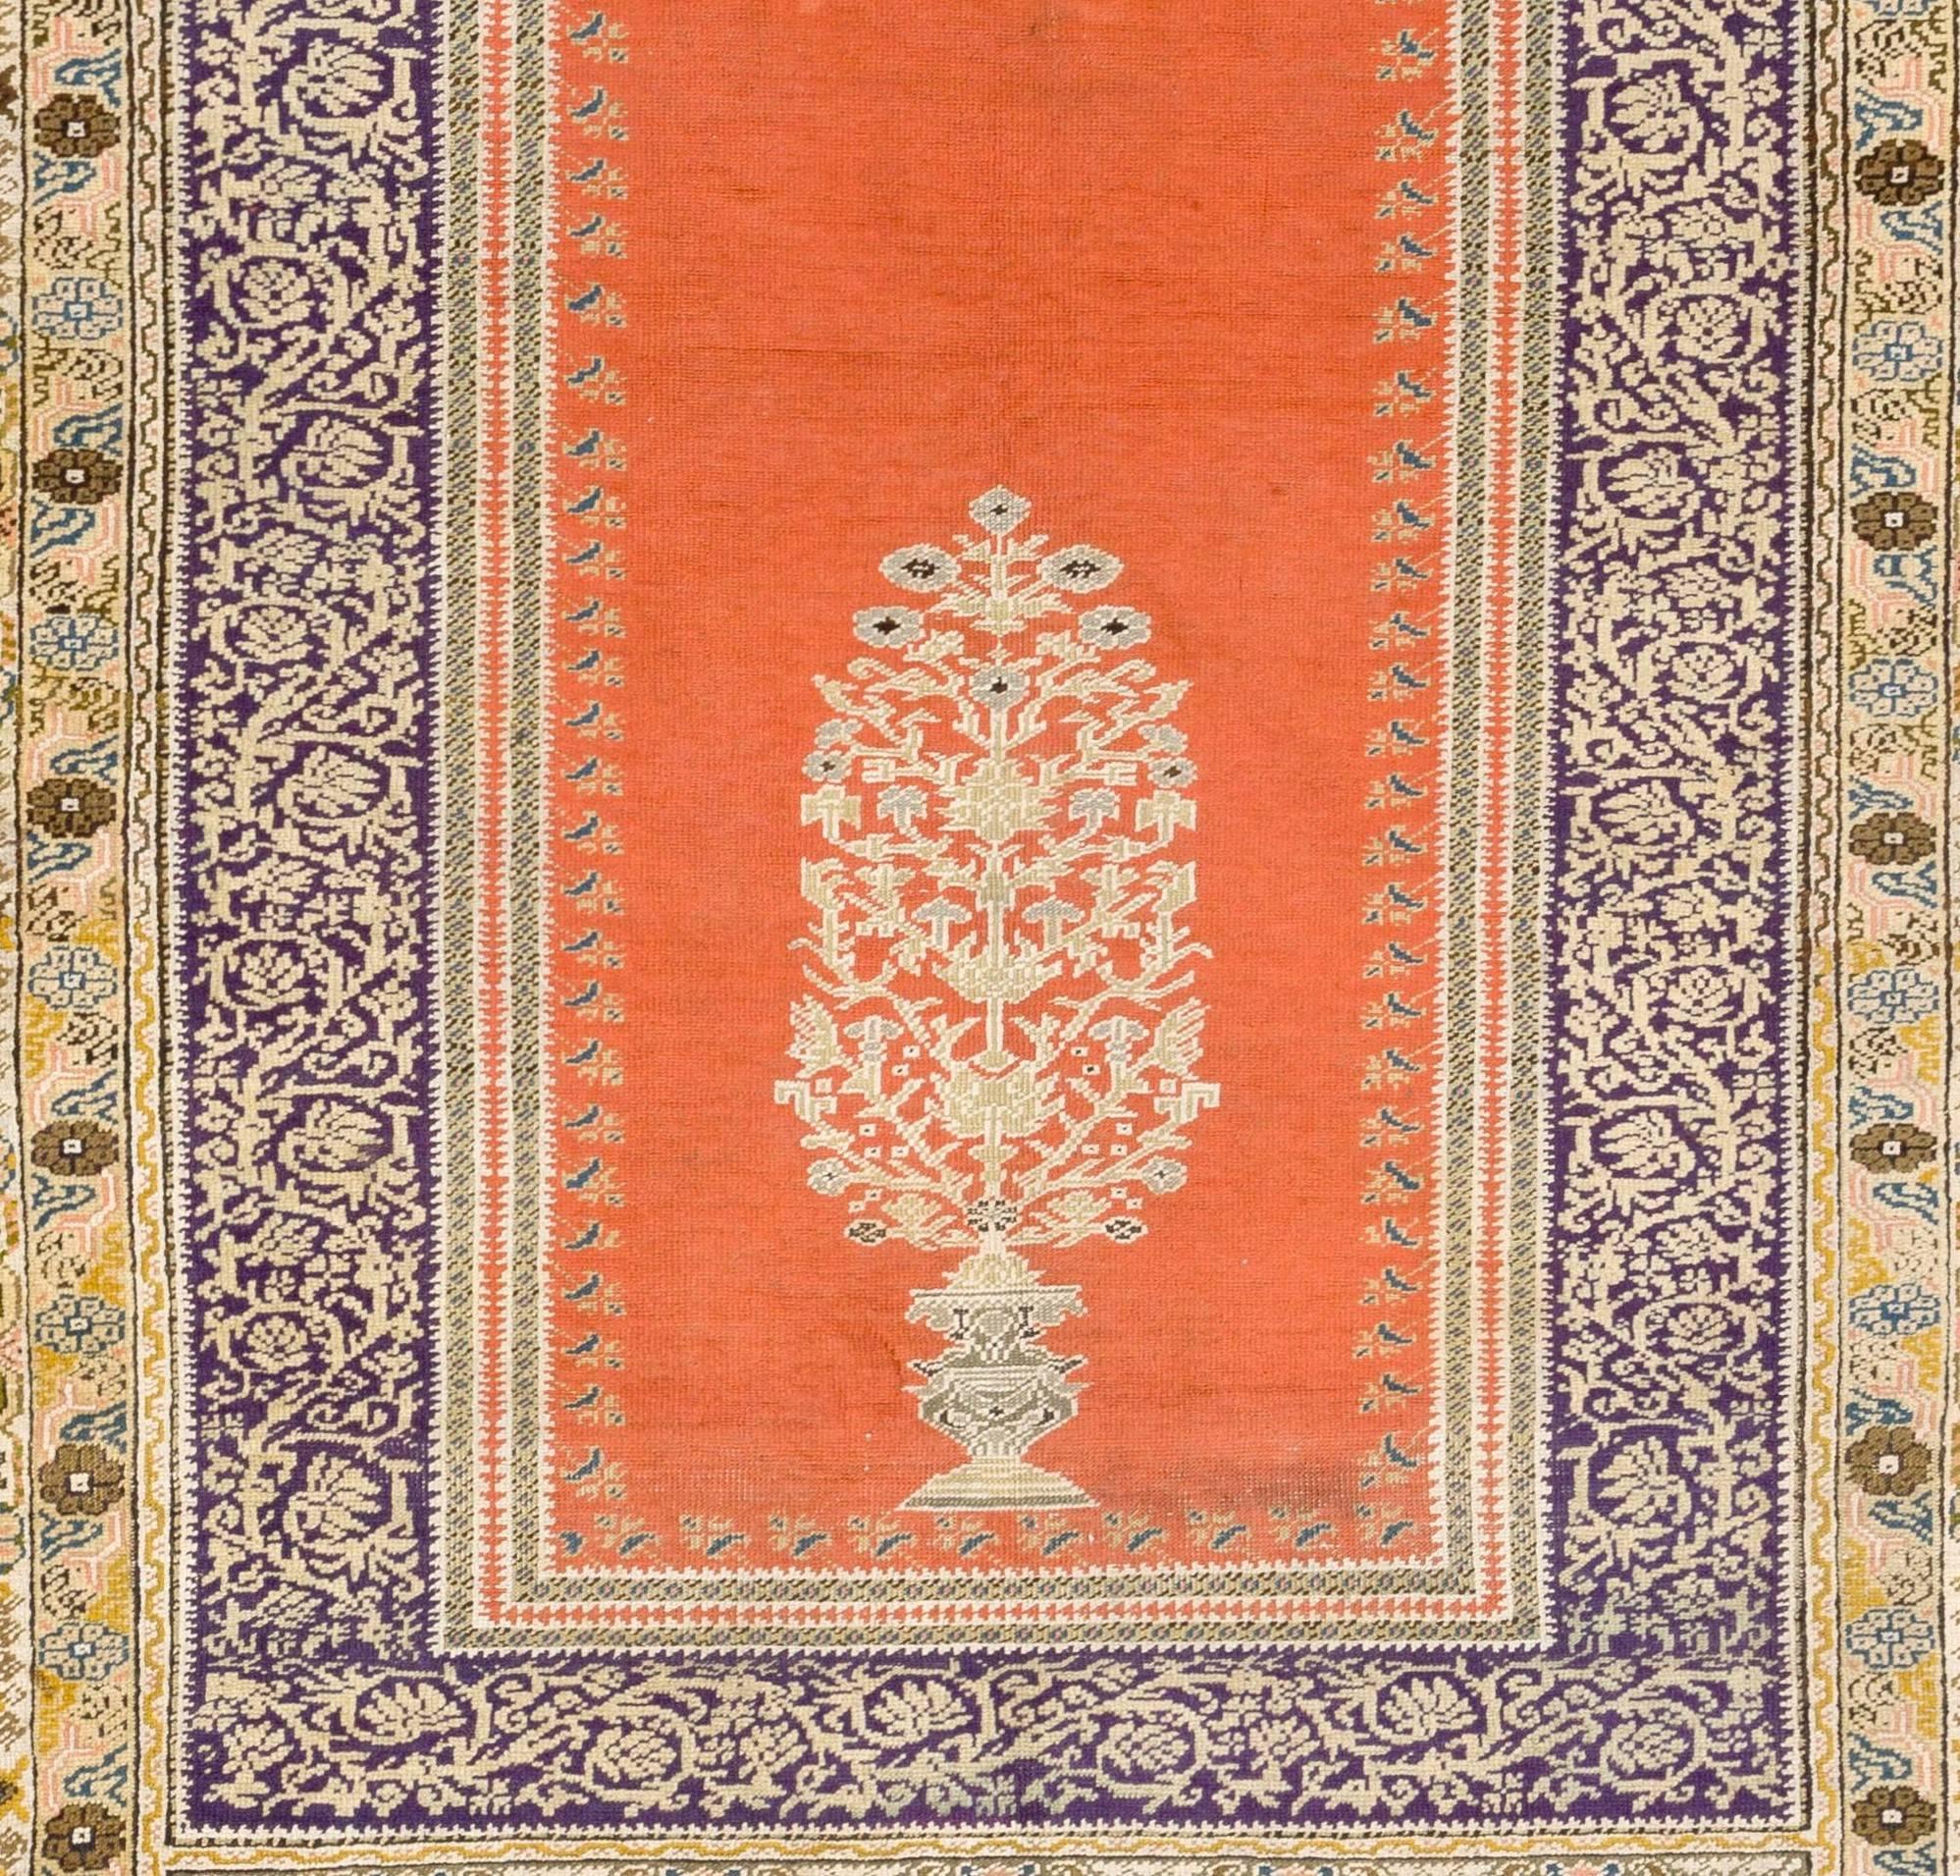 An antique Panderma (now called Bandirma town) prayer rug from North West Turkey. Wool pile on cotton foundation. Fine weave and good condition as seen. Measures: 4.8 x 6.6 ft.